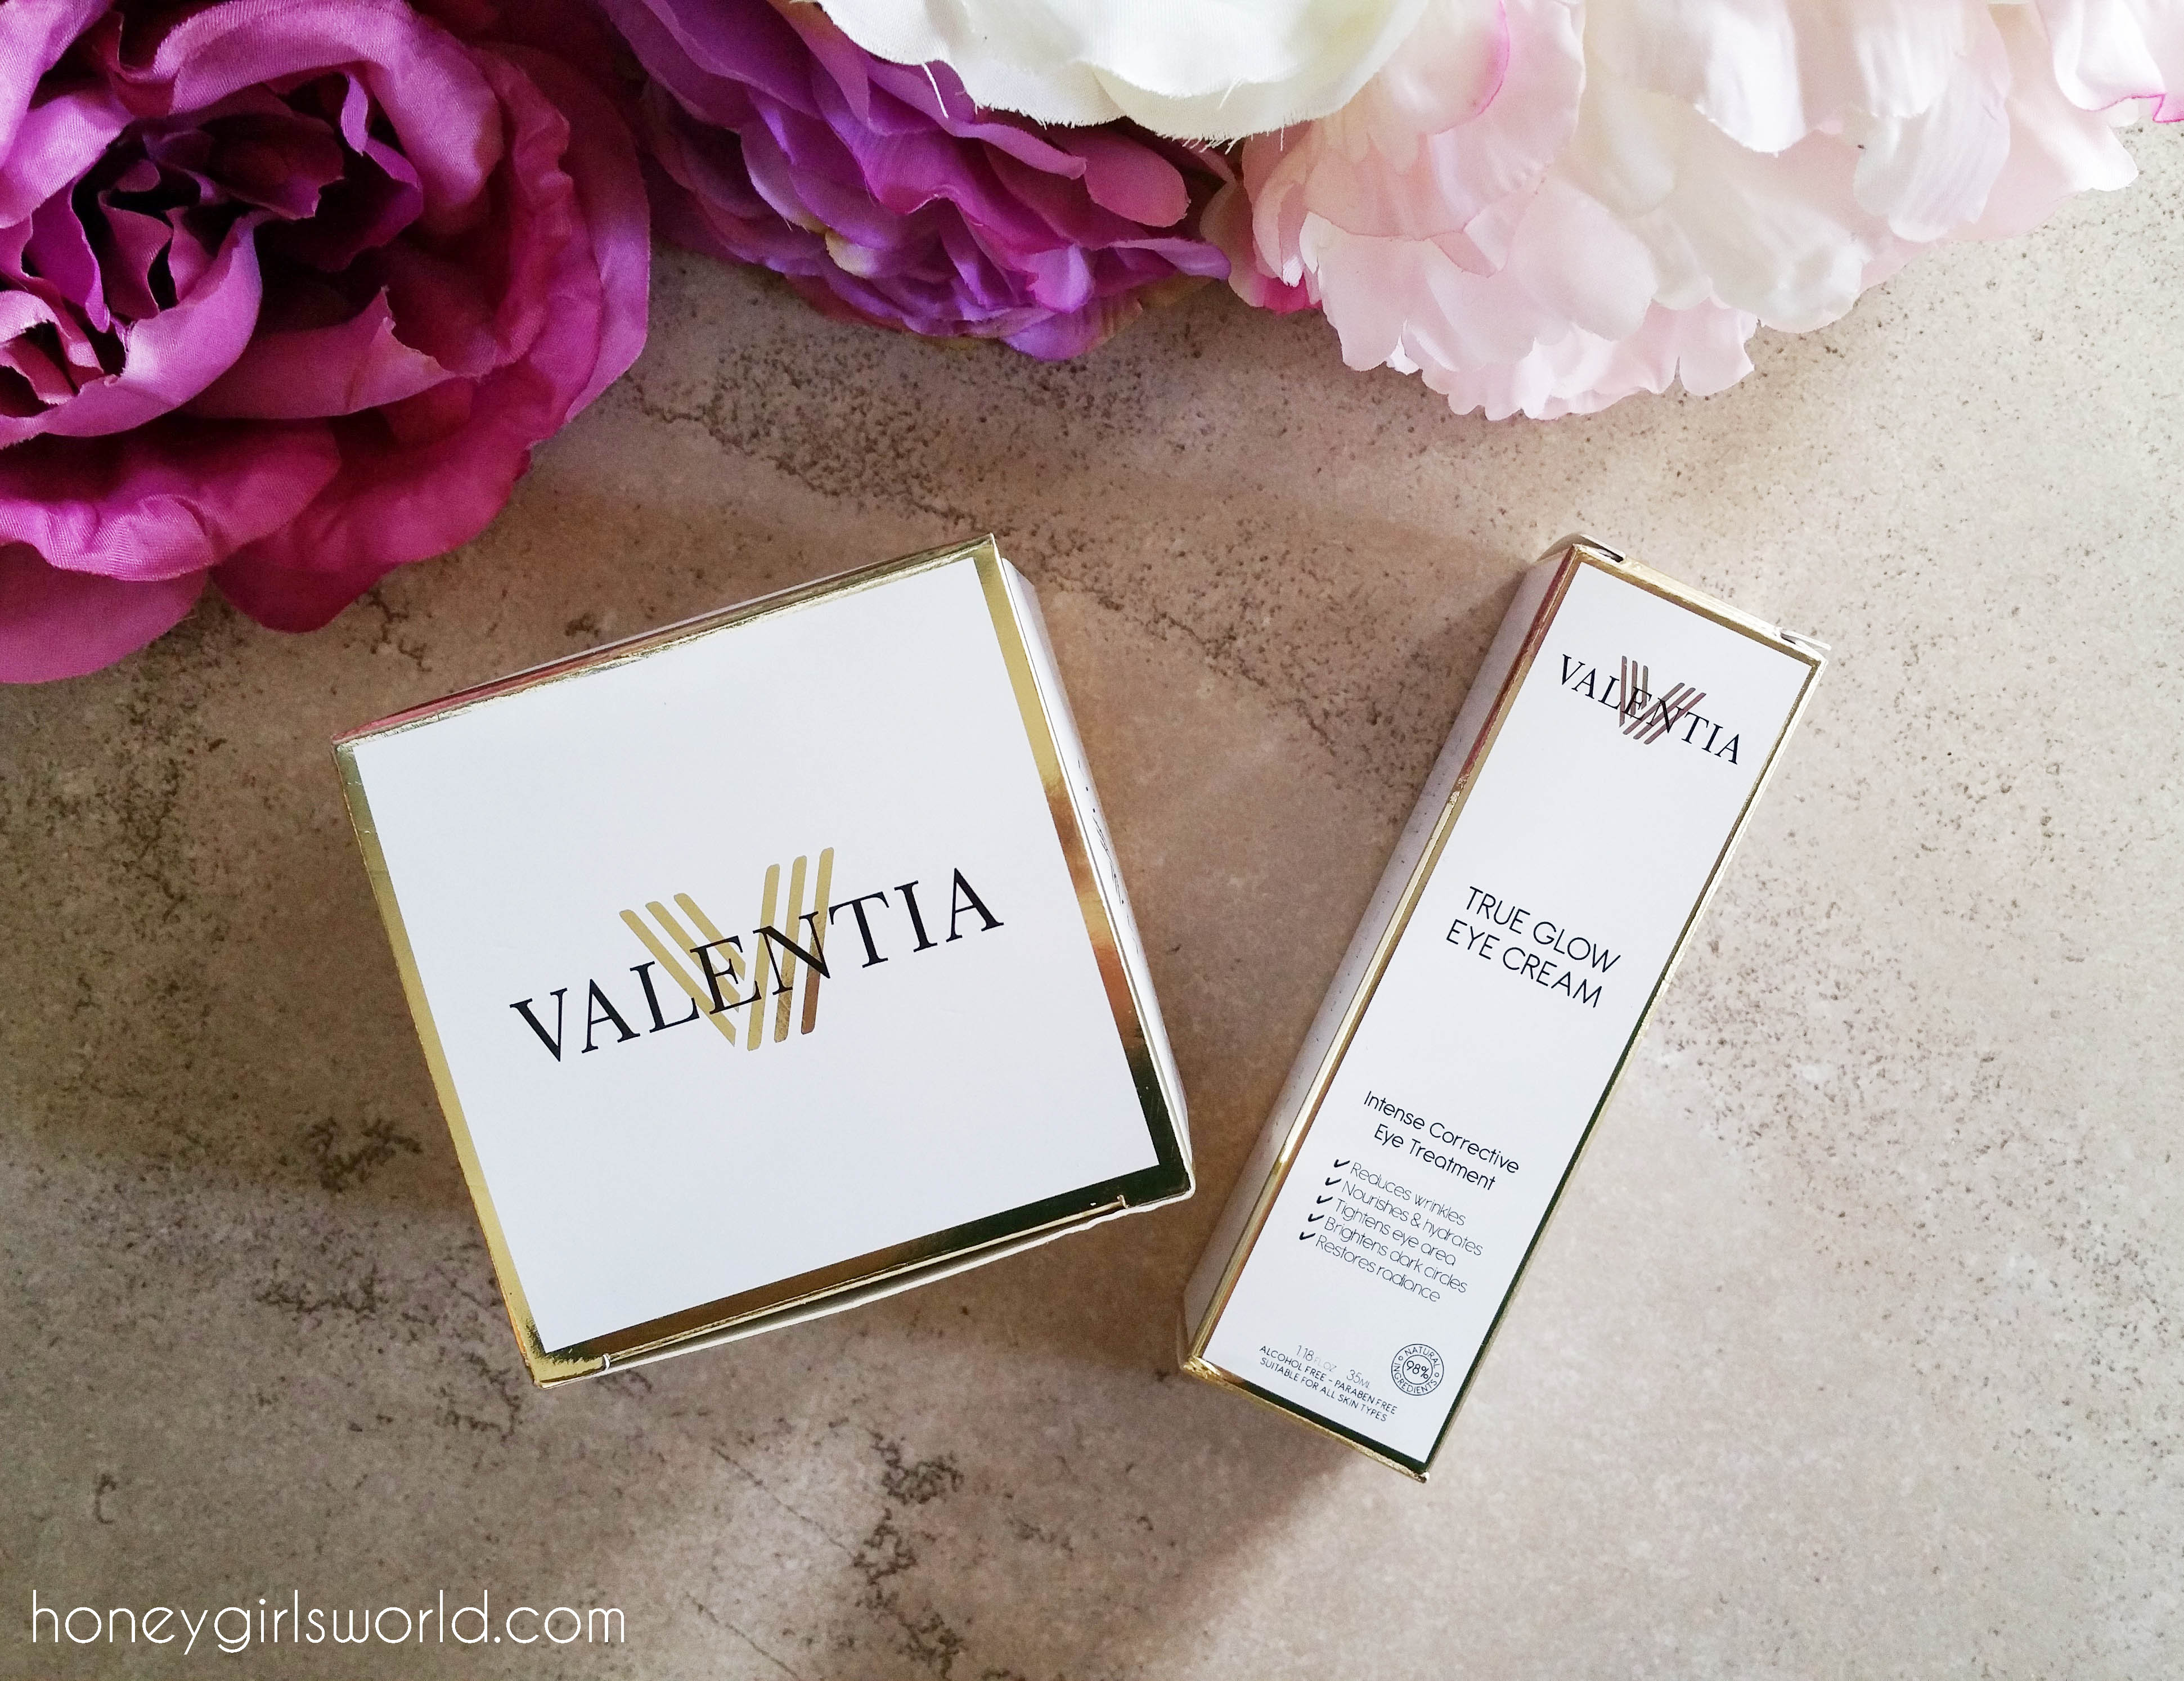 skin care, face mask, Valentia, Valentia True Glow Eye Cream, Valentia Ultra Plumping Hydration Mask, eye cream, skin, face, product review, beauty, skin care products,